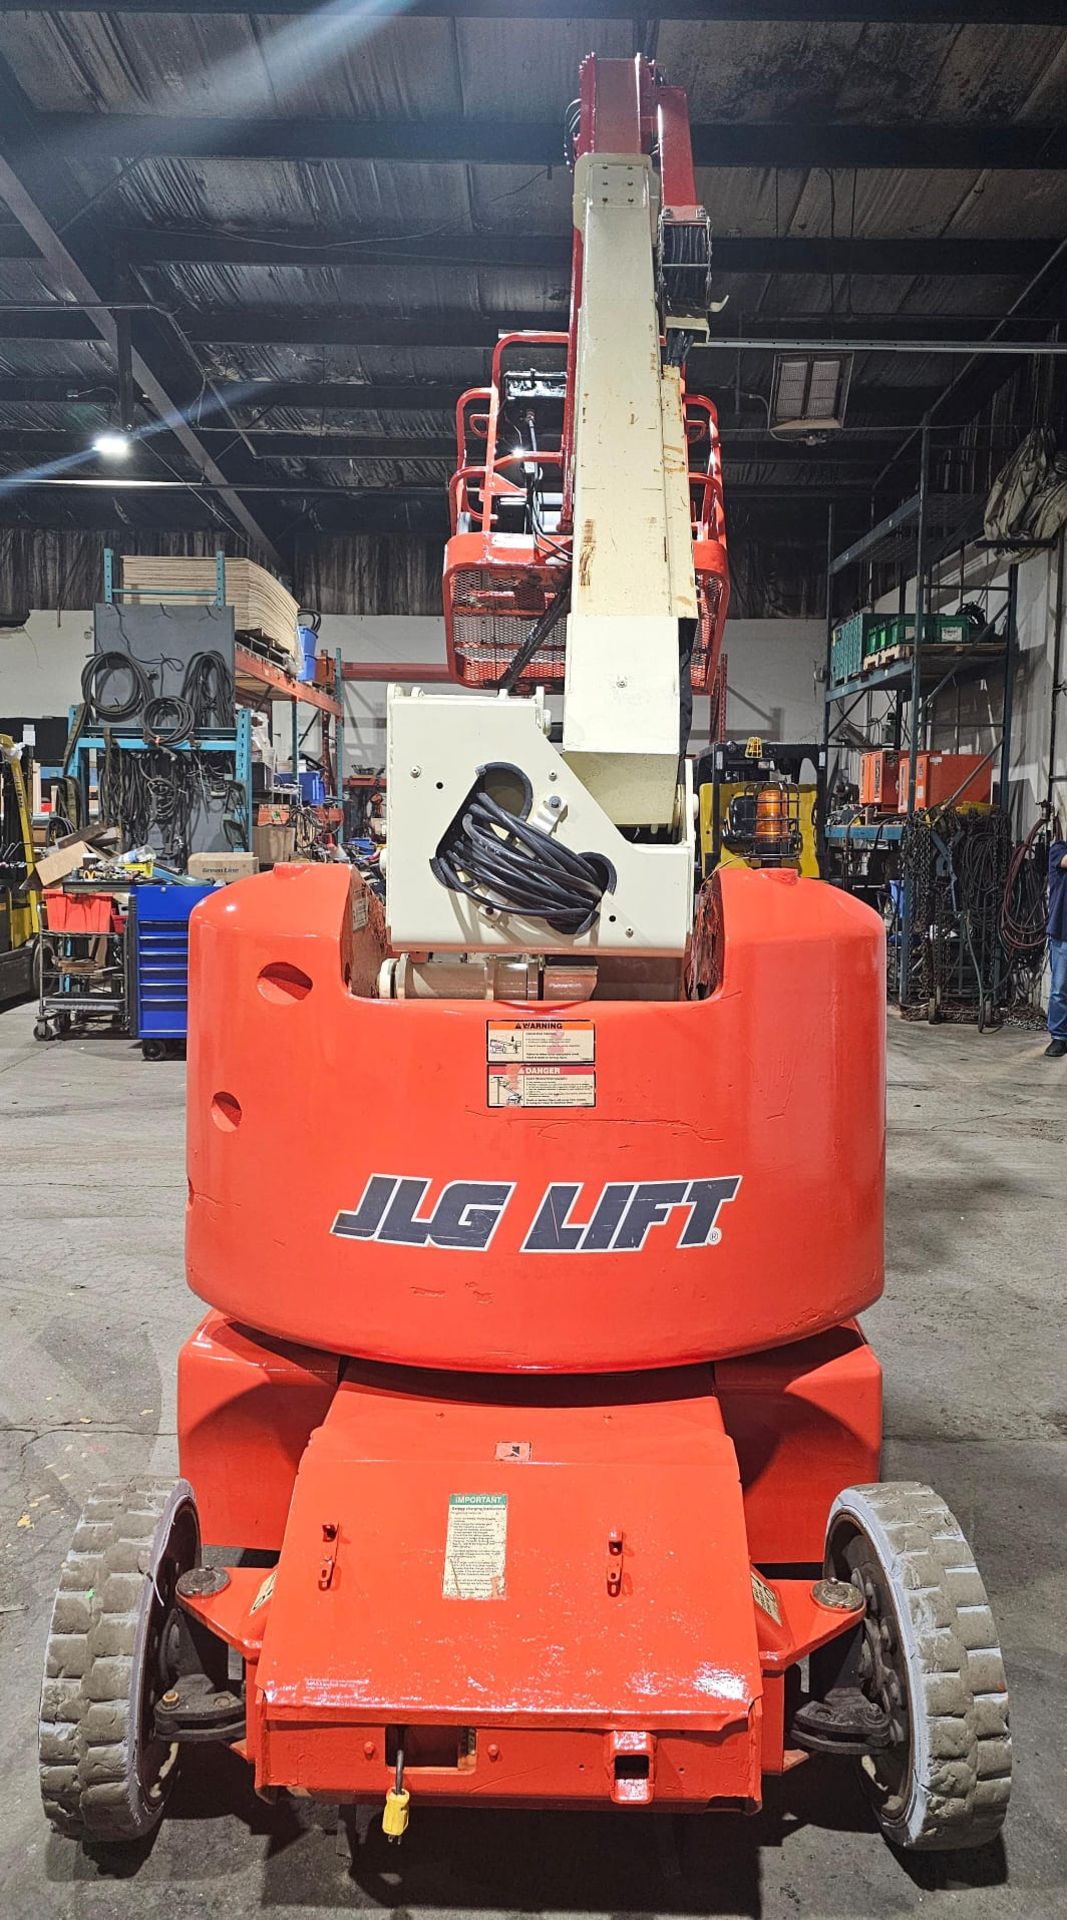 2006 JLG LIFT E400AJP Articulating Zoom Boom Lift - Narrow 500 lbs VERY LOW HOURS - 40ft lift height - Image 7 of 9